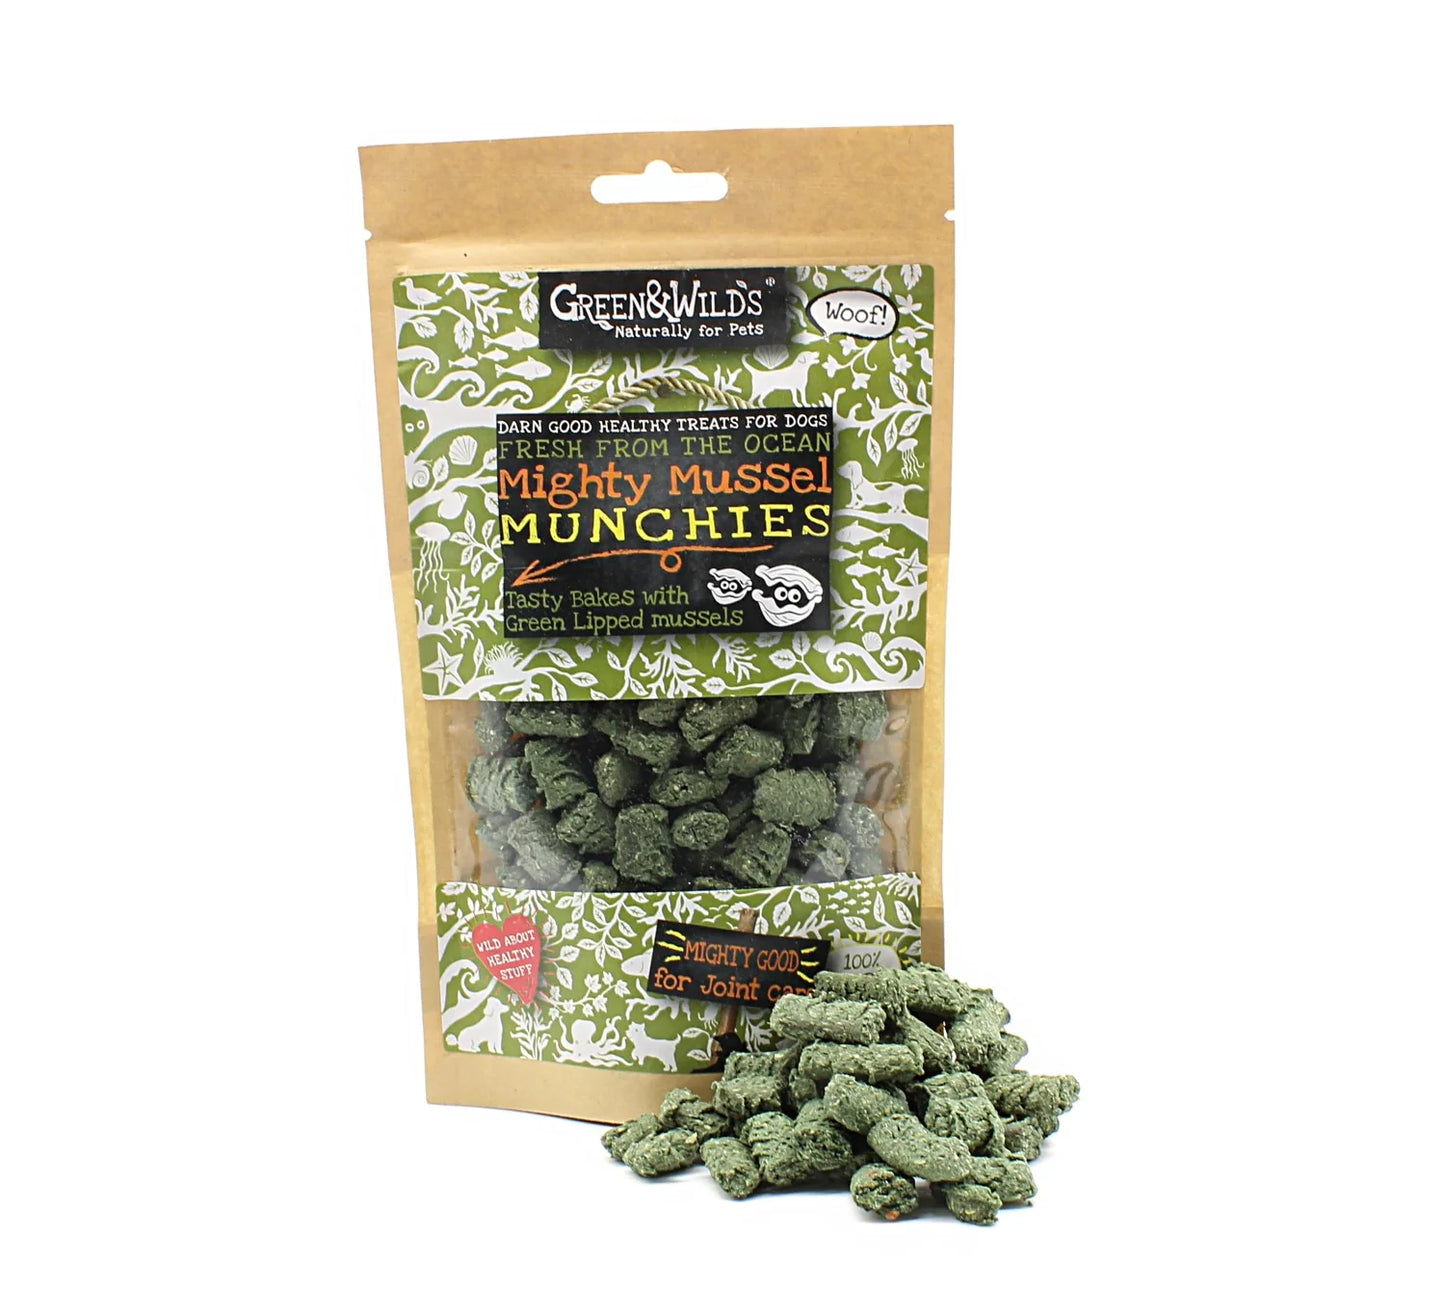 Green & Wilds Mighty Mussel Munchies, 130g Dog Treats